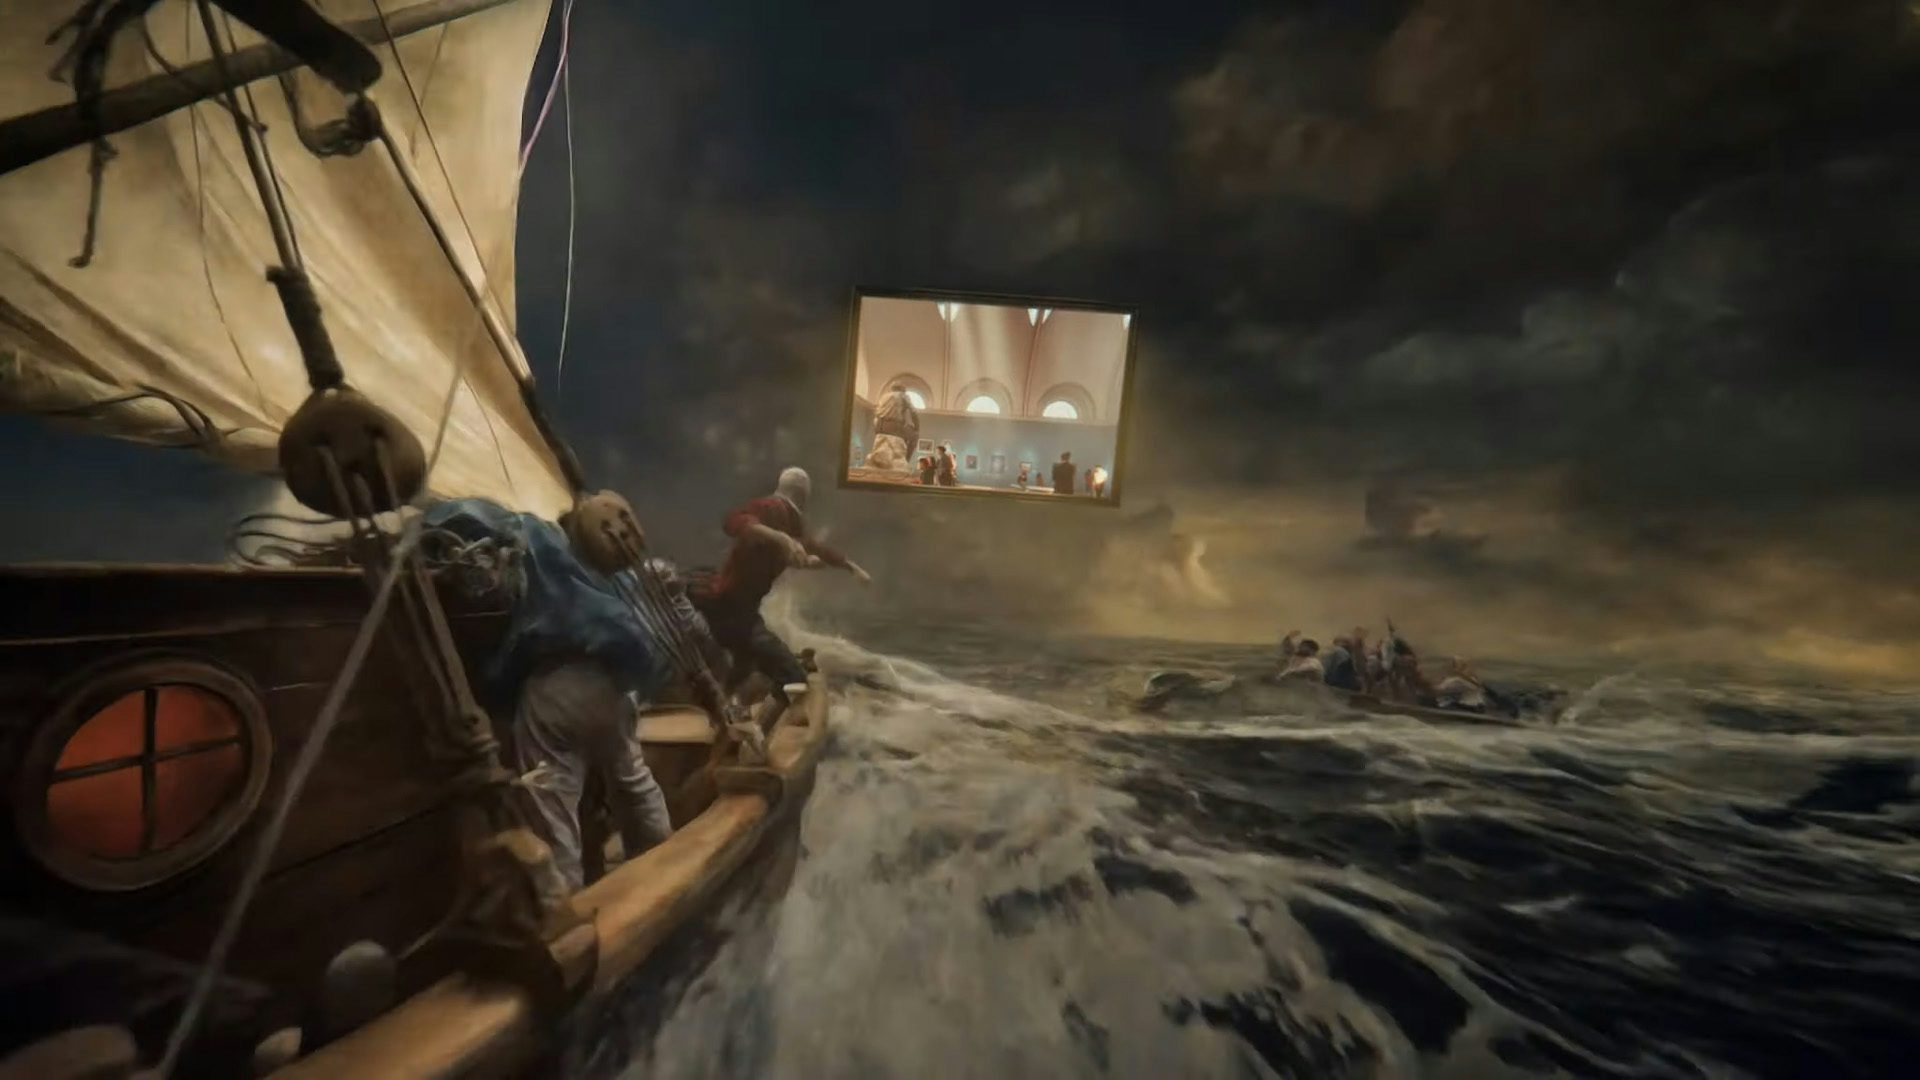 Image shows sailors in a storm heading towards a portal into a museum, as seen in Coca-Cola ad Masterpiece